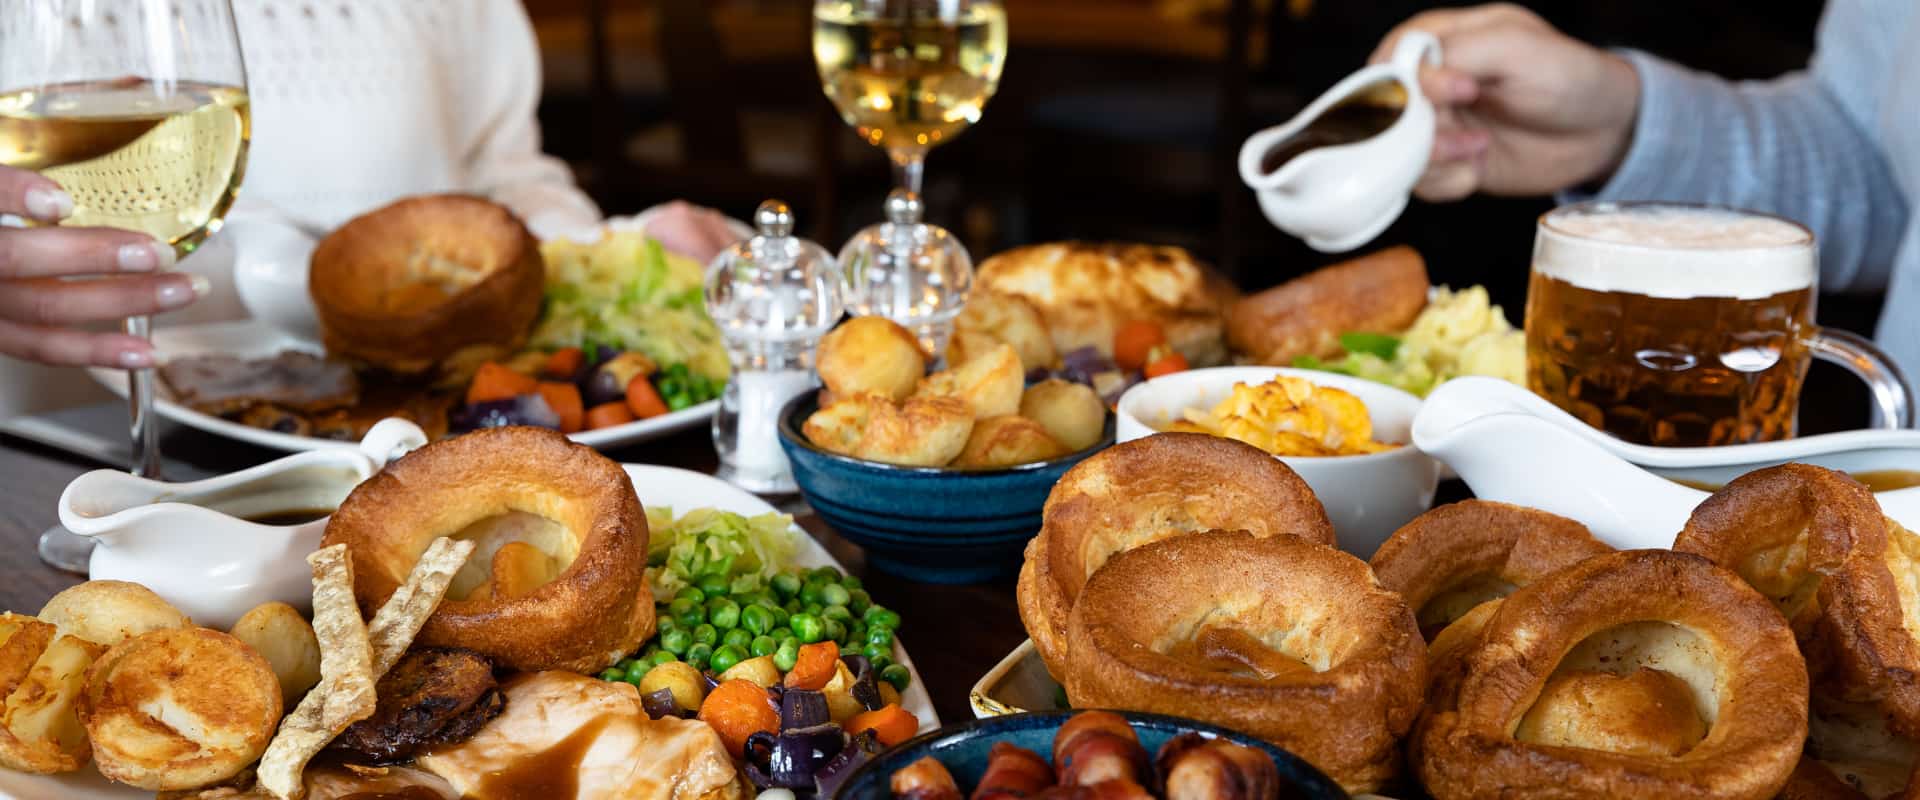 Enjoy a delicious Sunday lunch at The Stork Hotel